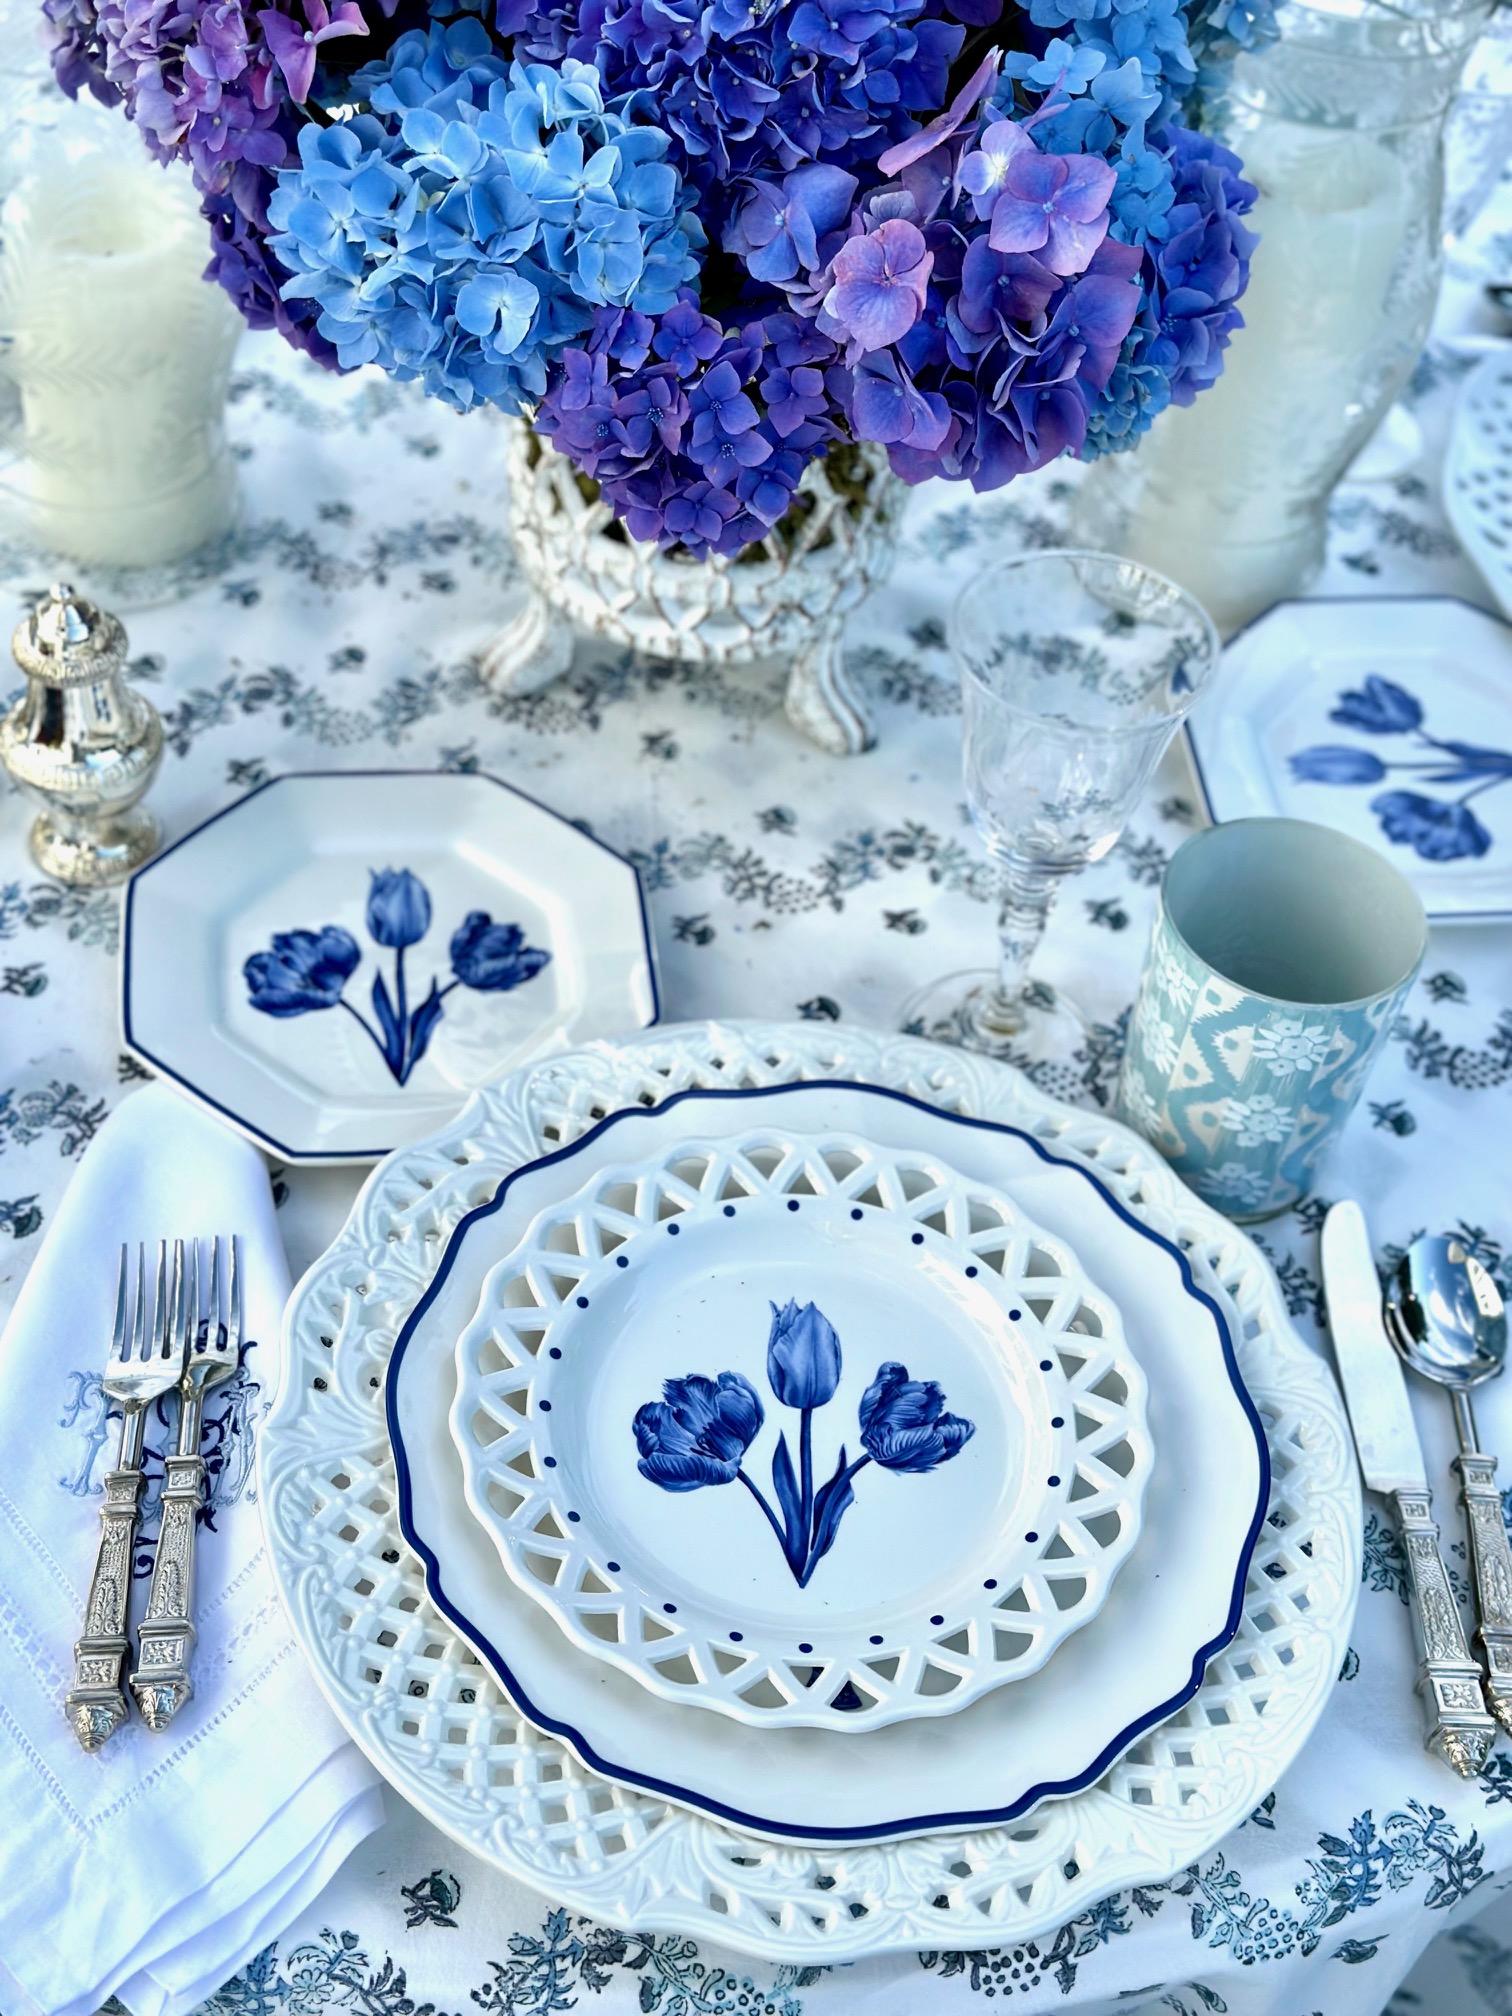 A very special presale on our newest dinnerware collaboration with Carolyne Roehm and a giveaway!